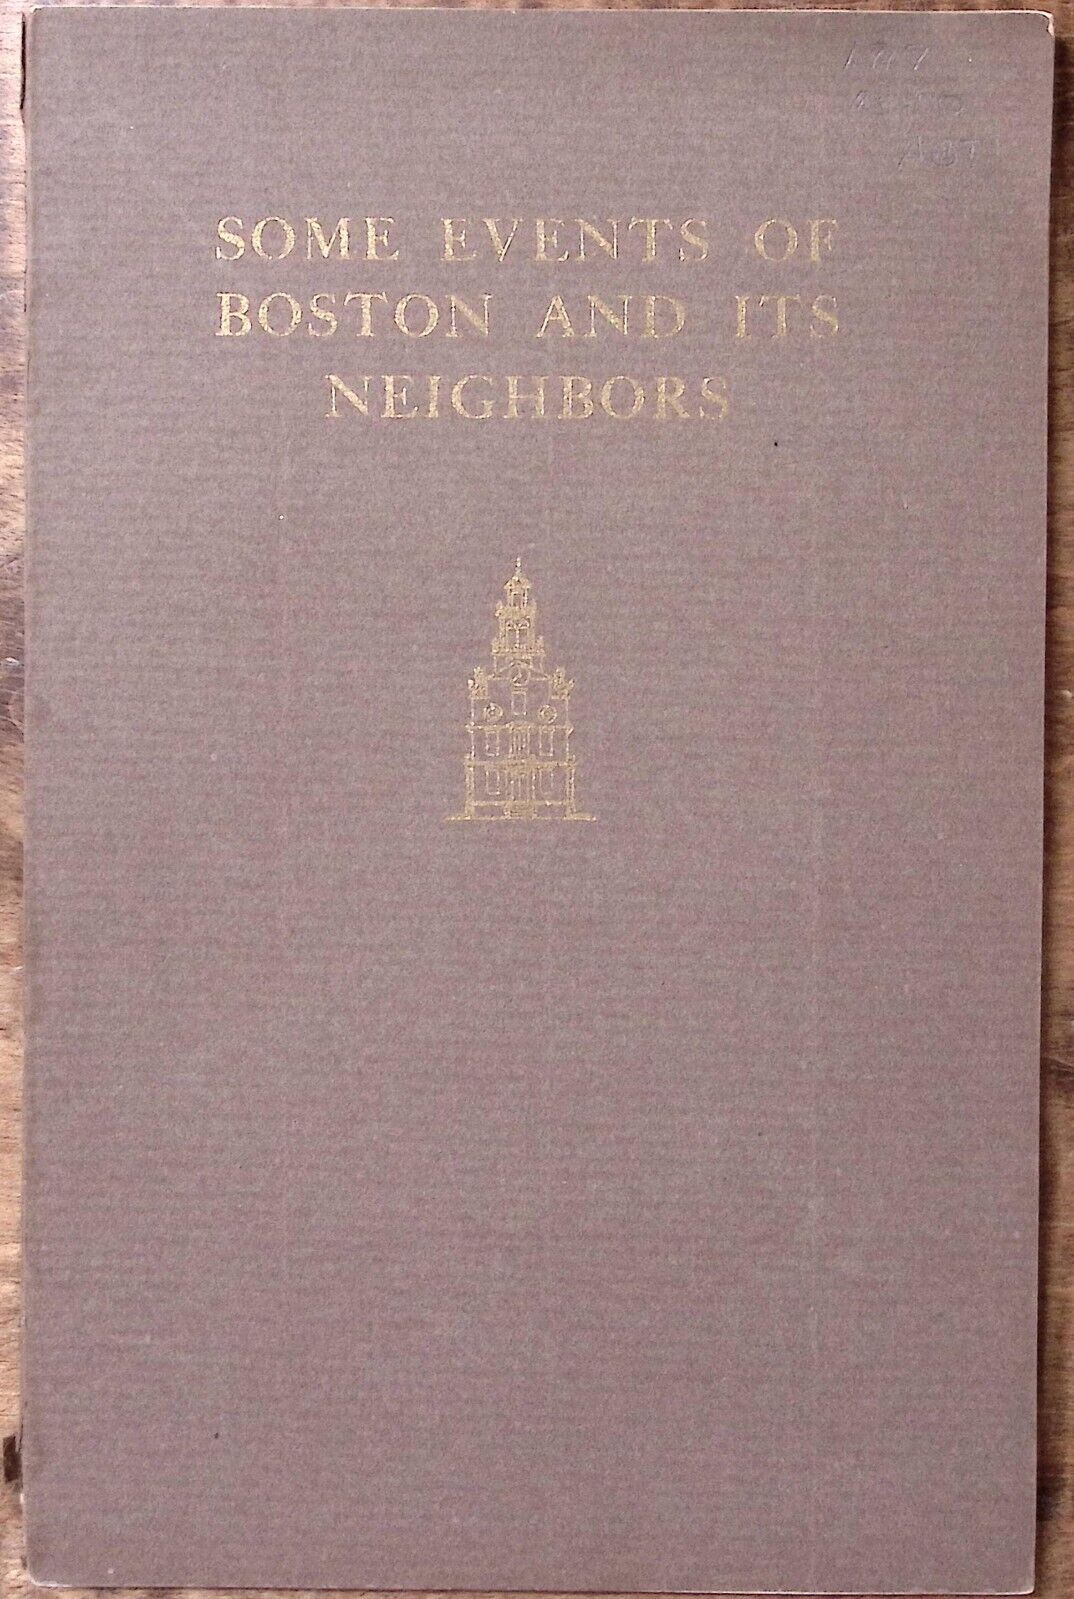 1917 BOSTON MA SOME EVENTS OF BOSTON AND ITS NEIGHBORS STATE STREET TRUST Z5434